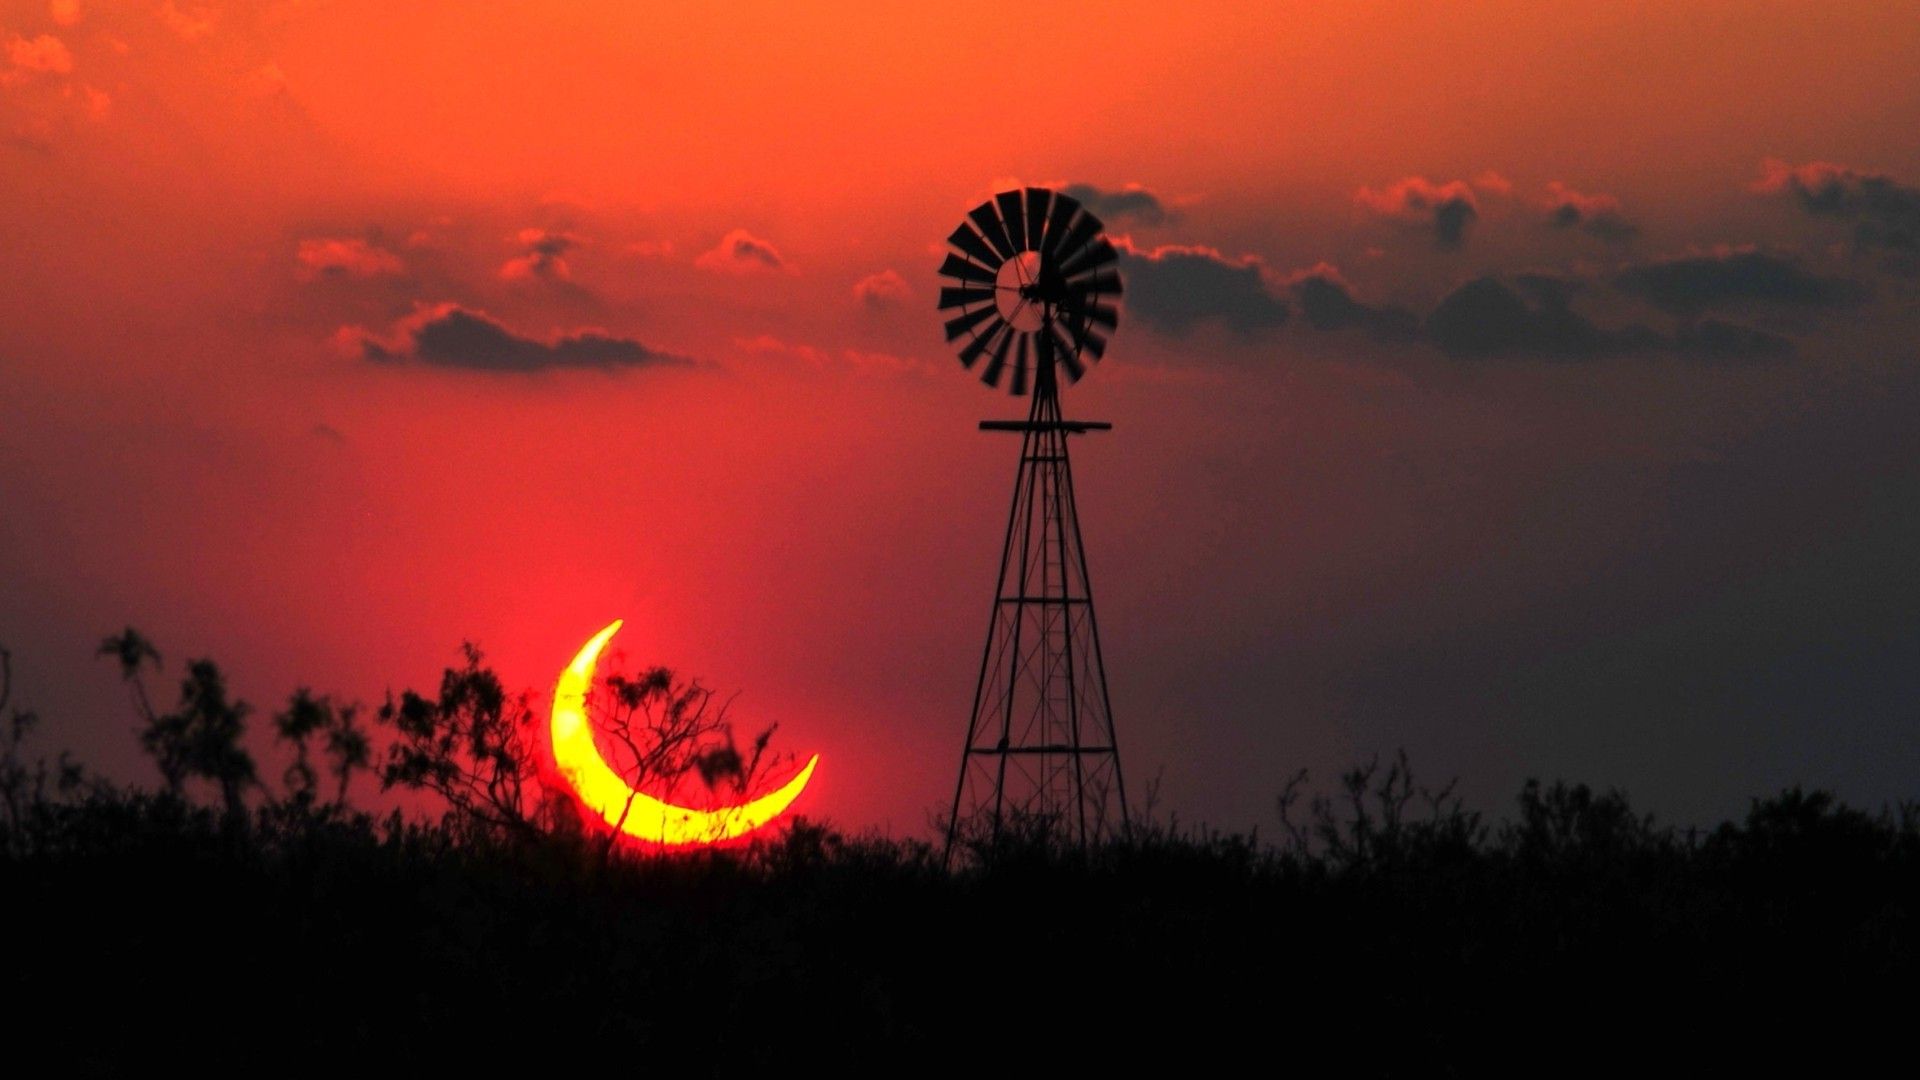 A sunset with the moon in it - Texas